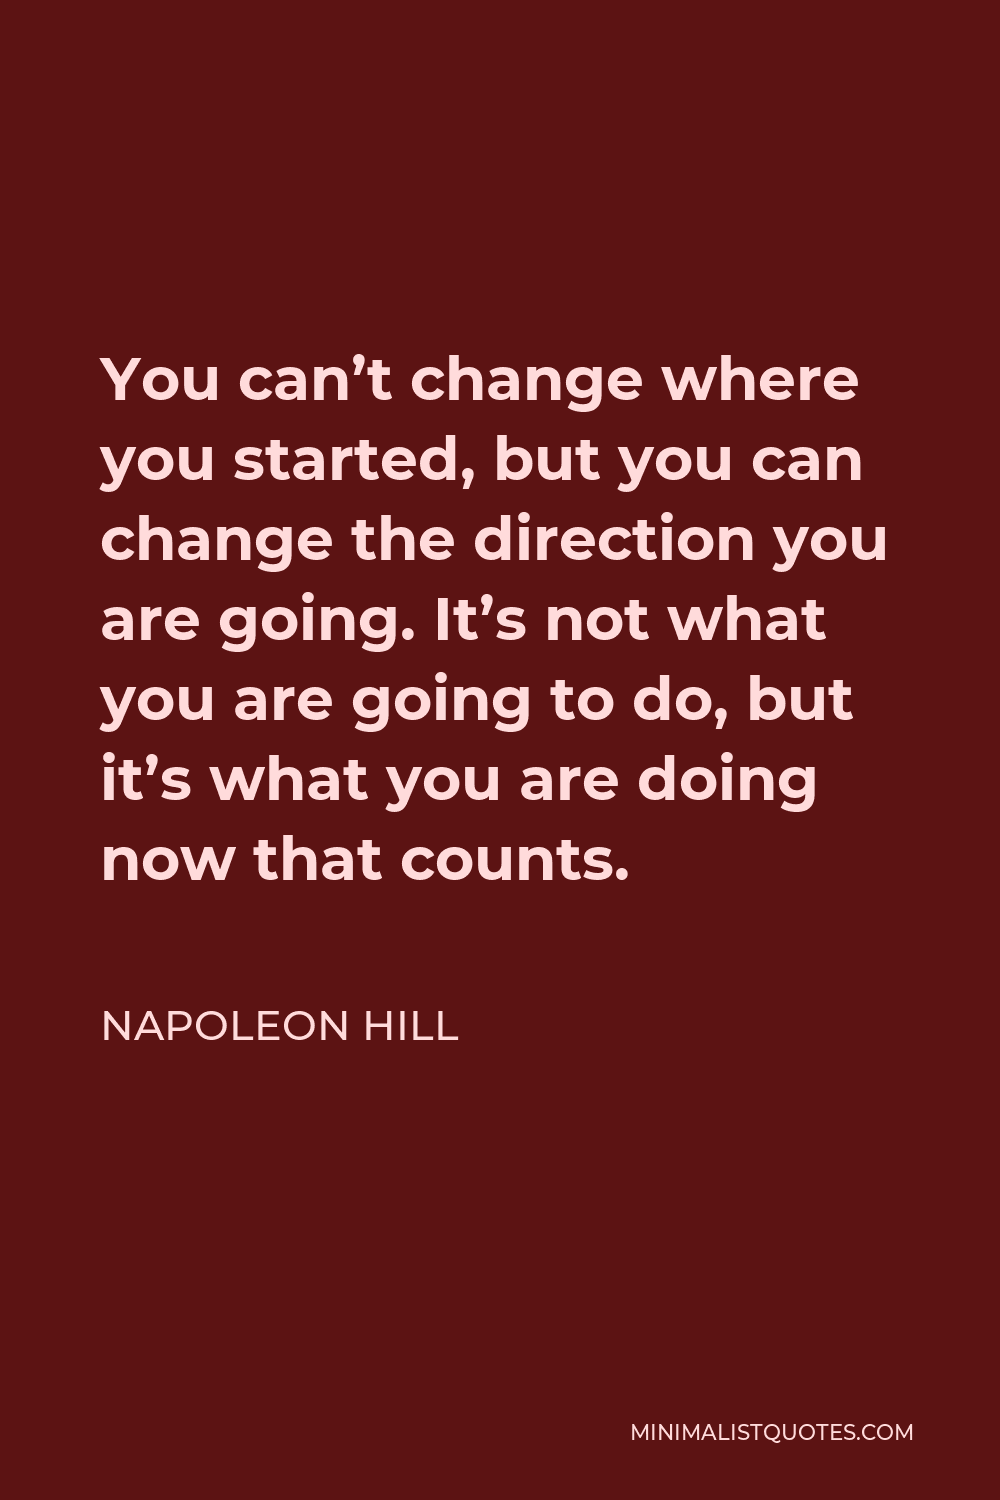 Napoleon Hill Quote - You can’t change where you started, but you can change the direction you are going. It’s not what you are going to do, but it’s what you are doing now that counts.